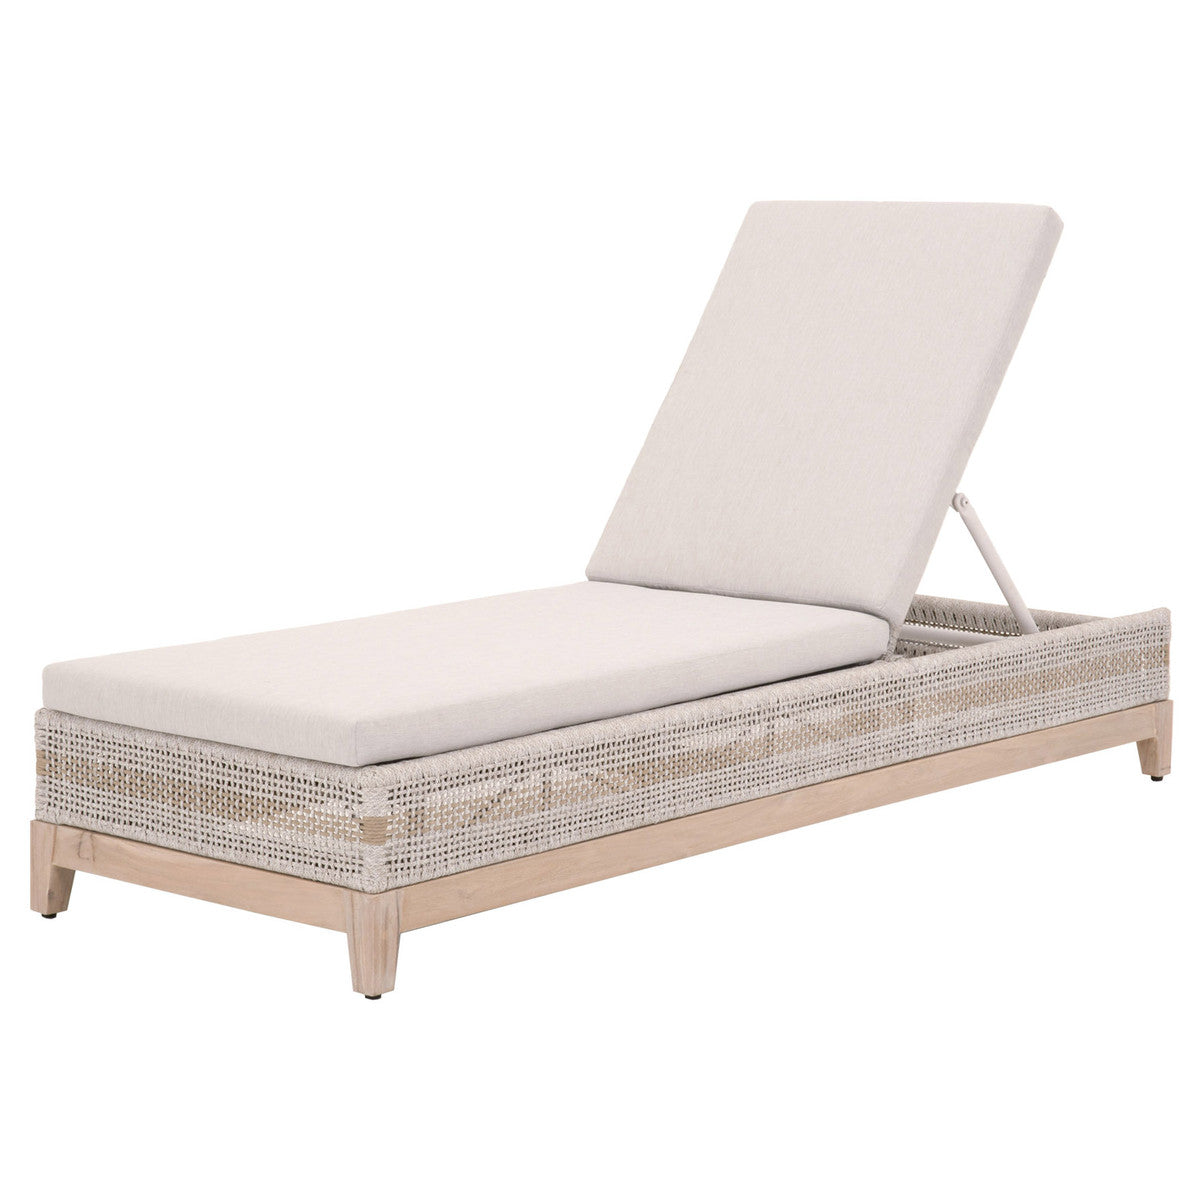 Tapestry Outdoor Chaise